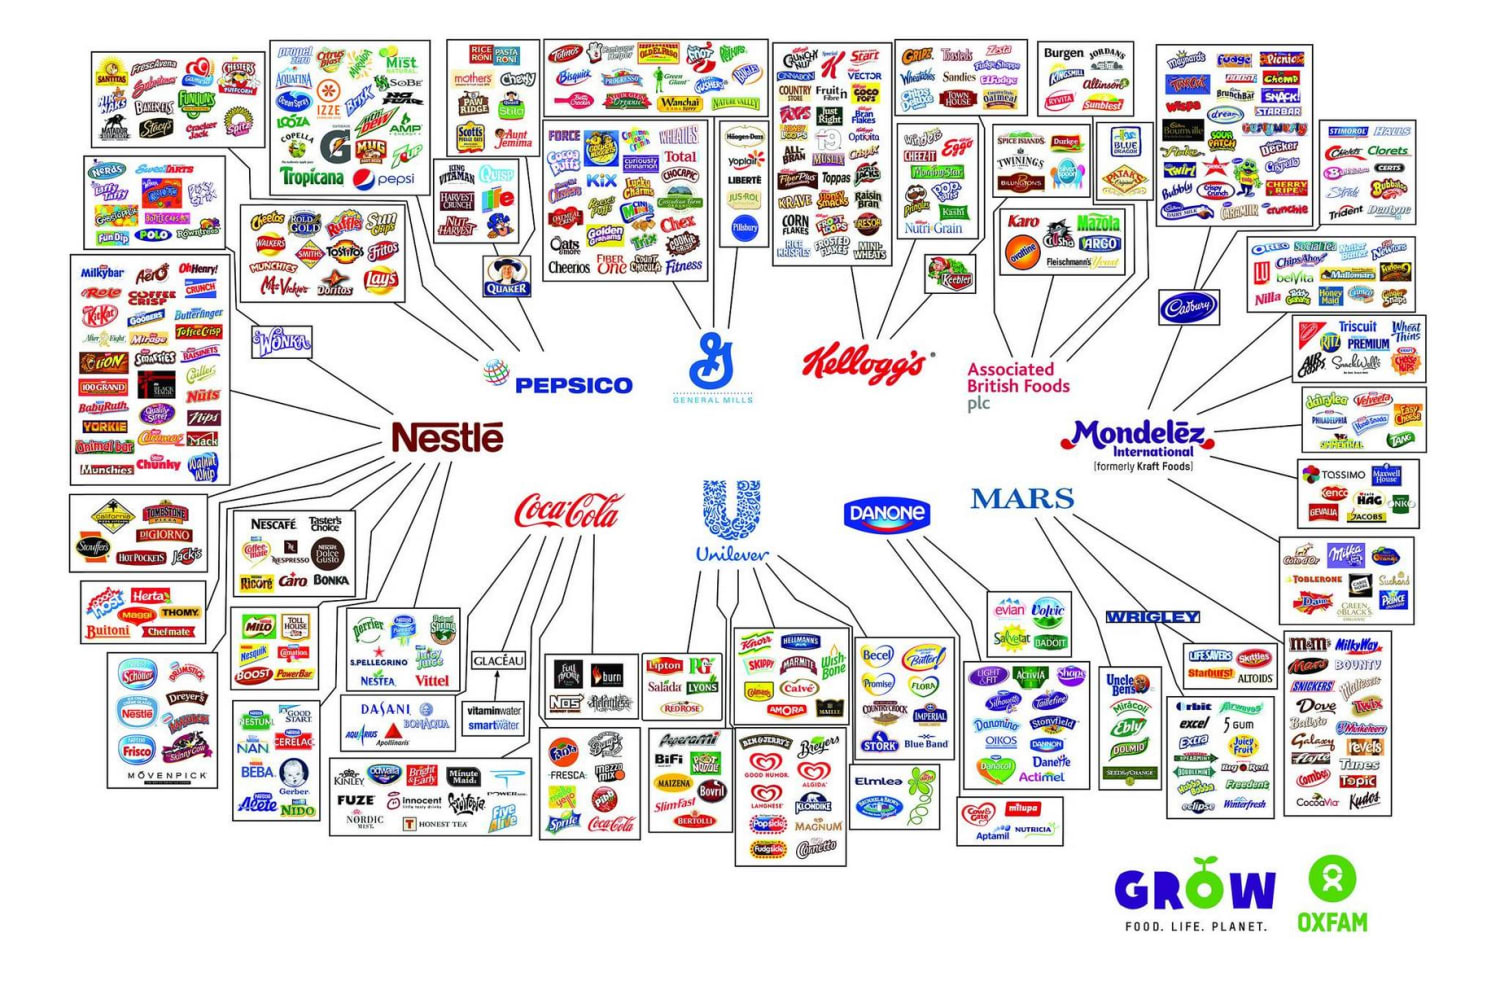 "The illusion of choice"